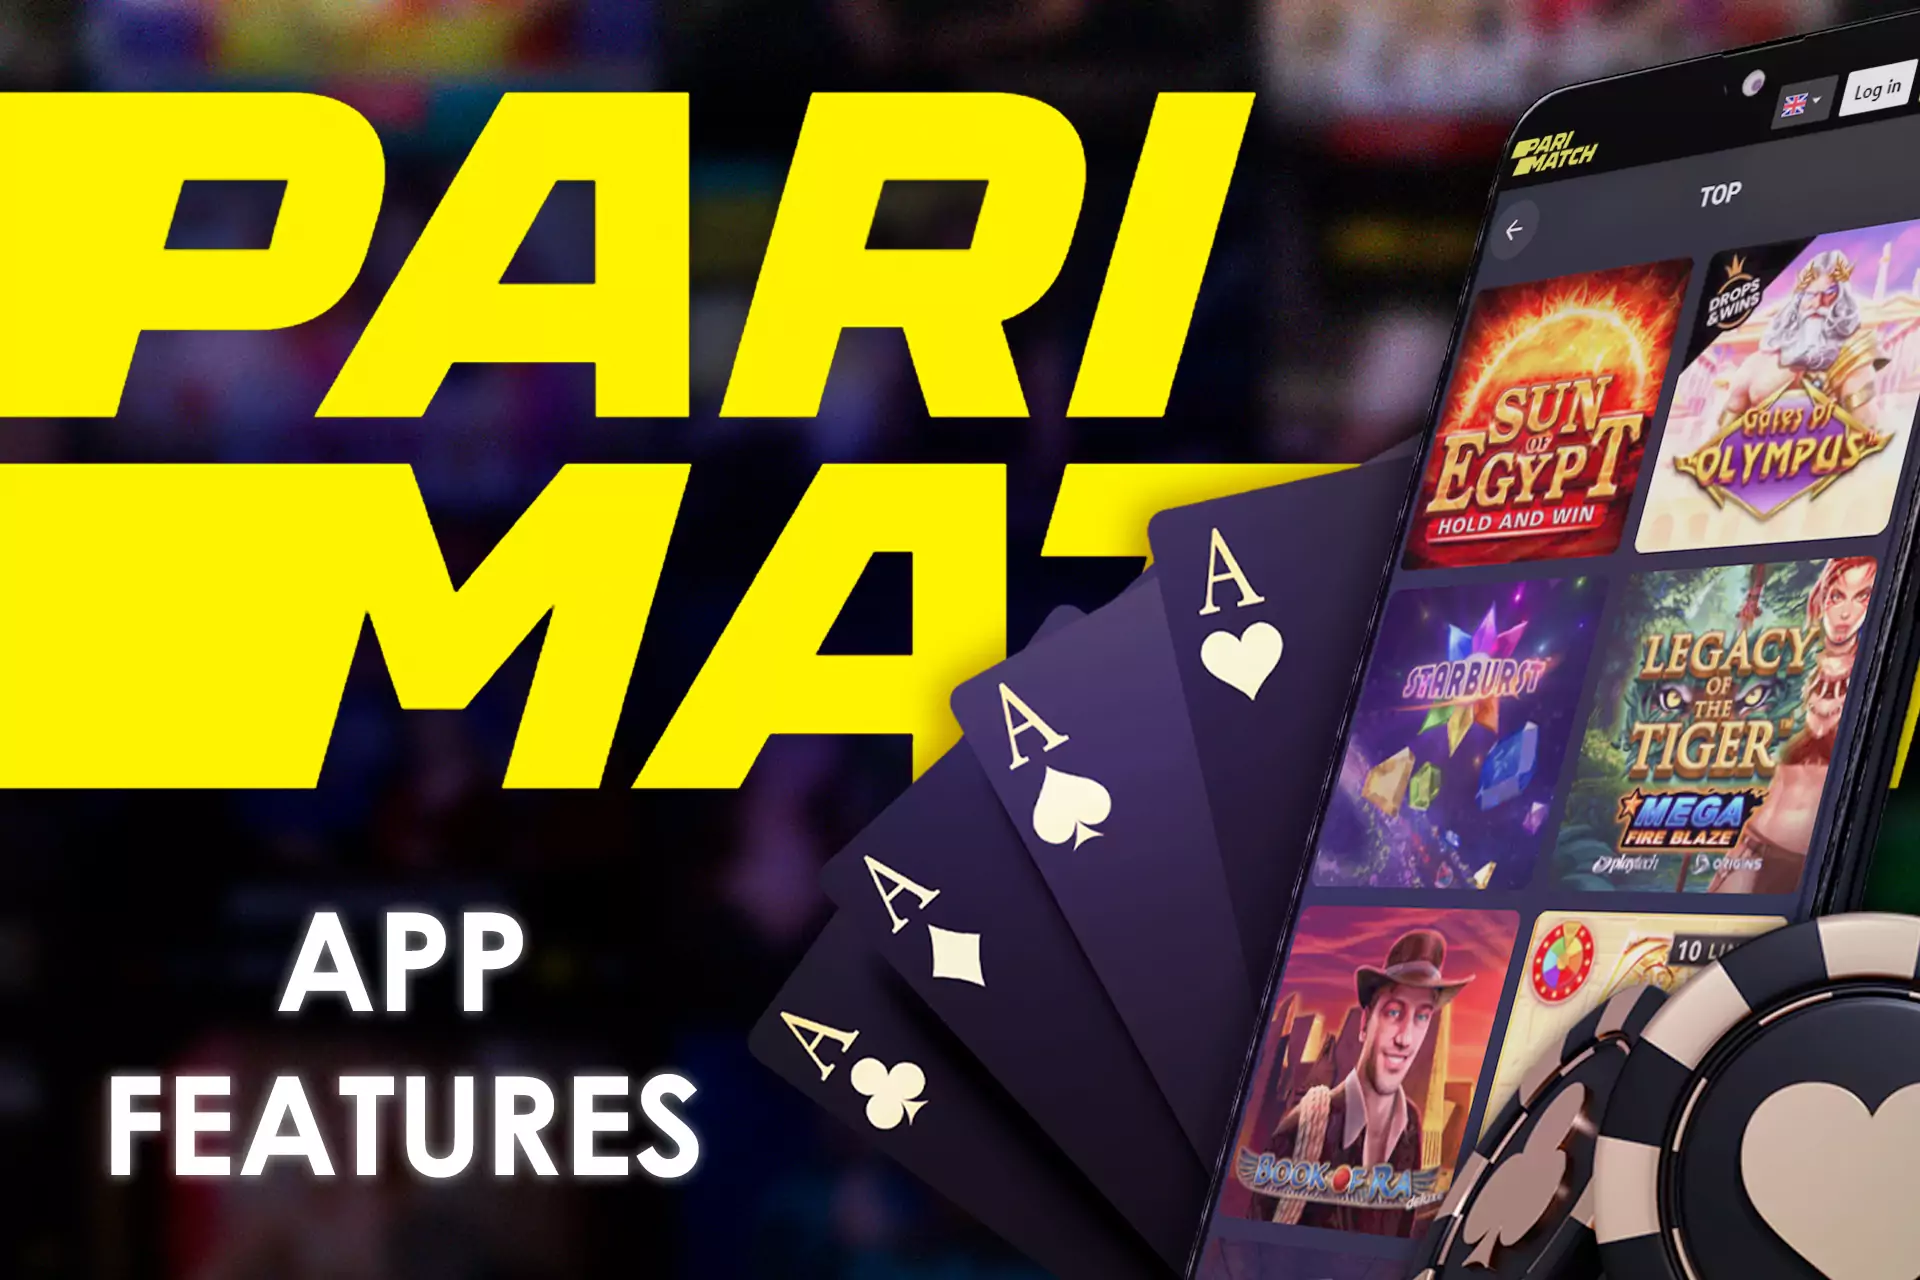 Install the Parimatch app and play games on your smartphone.